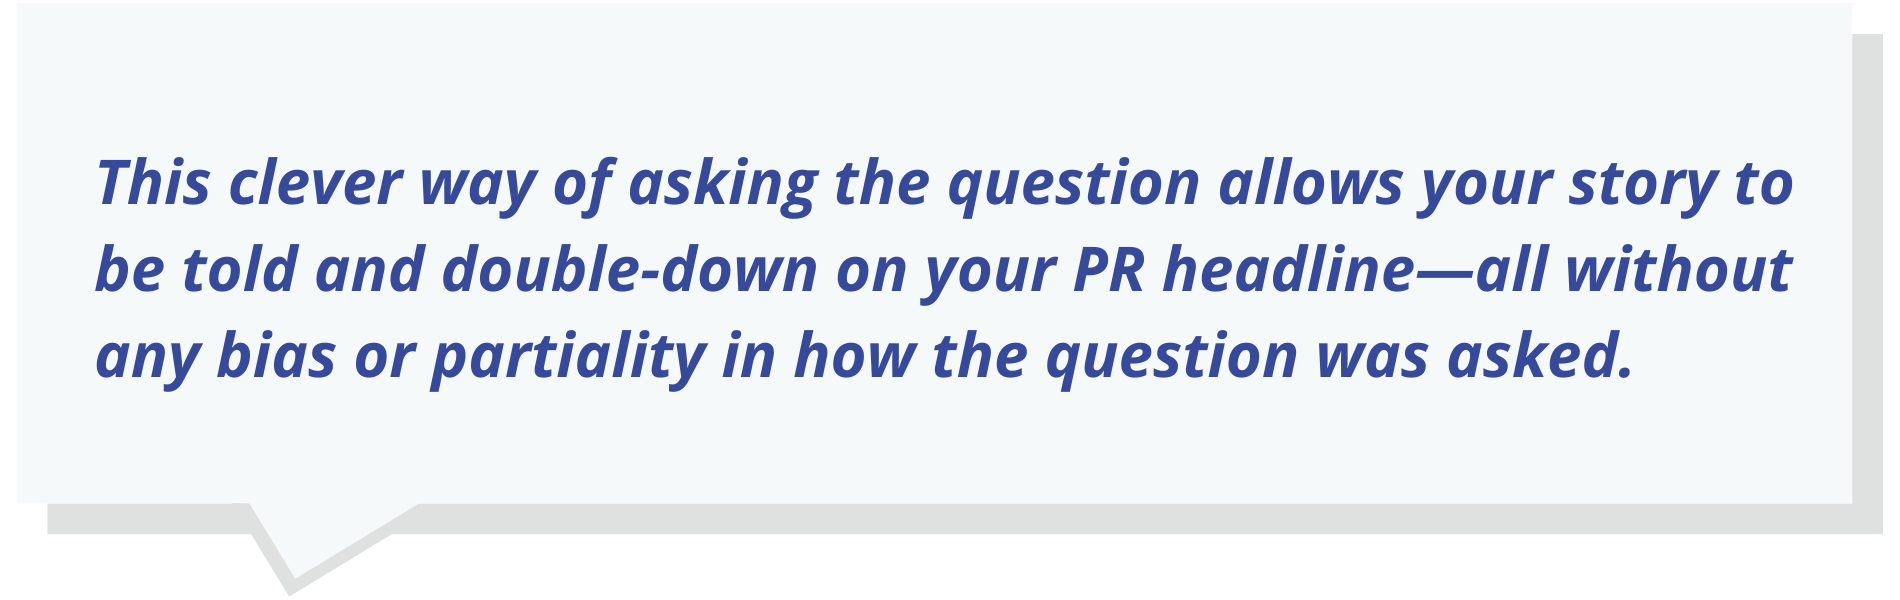 This clever way of asking the question allows your story to be told and double-down on your PR headline—all without any bias or partiality in how the question was asked.